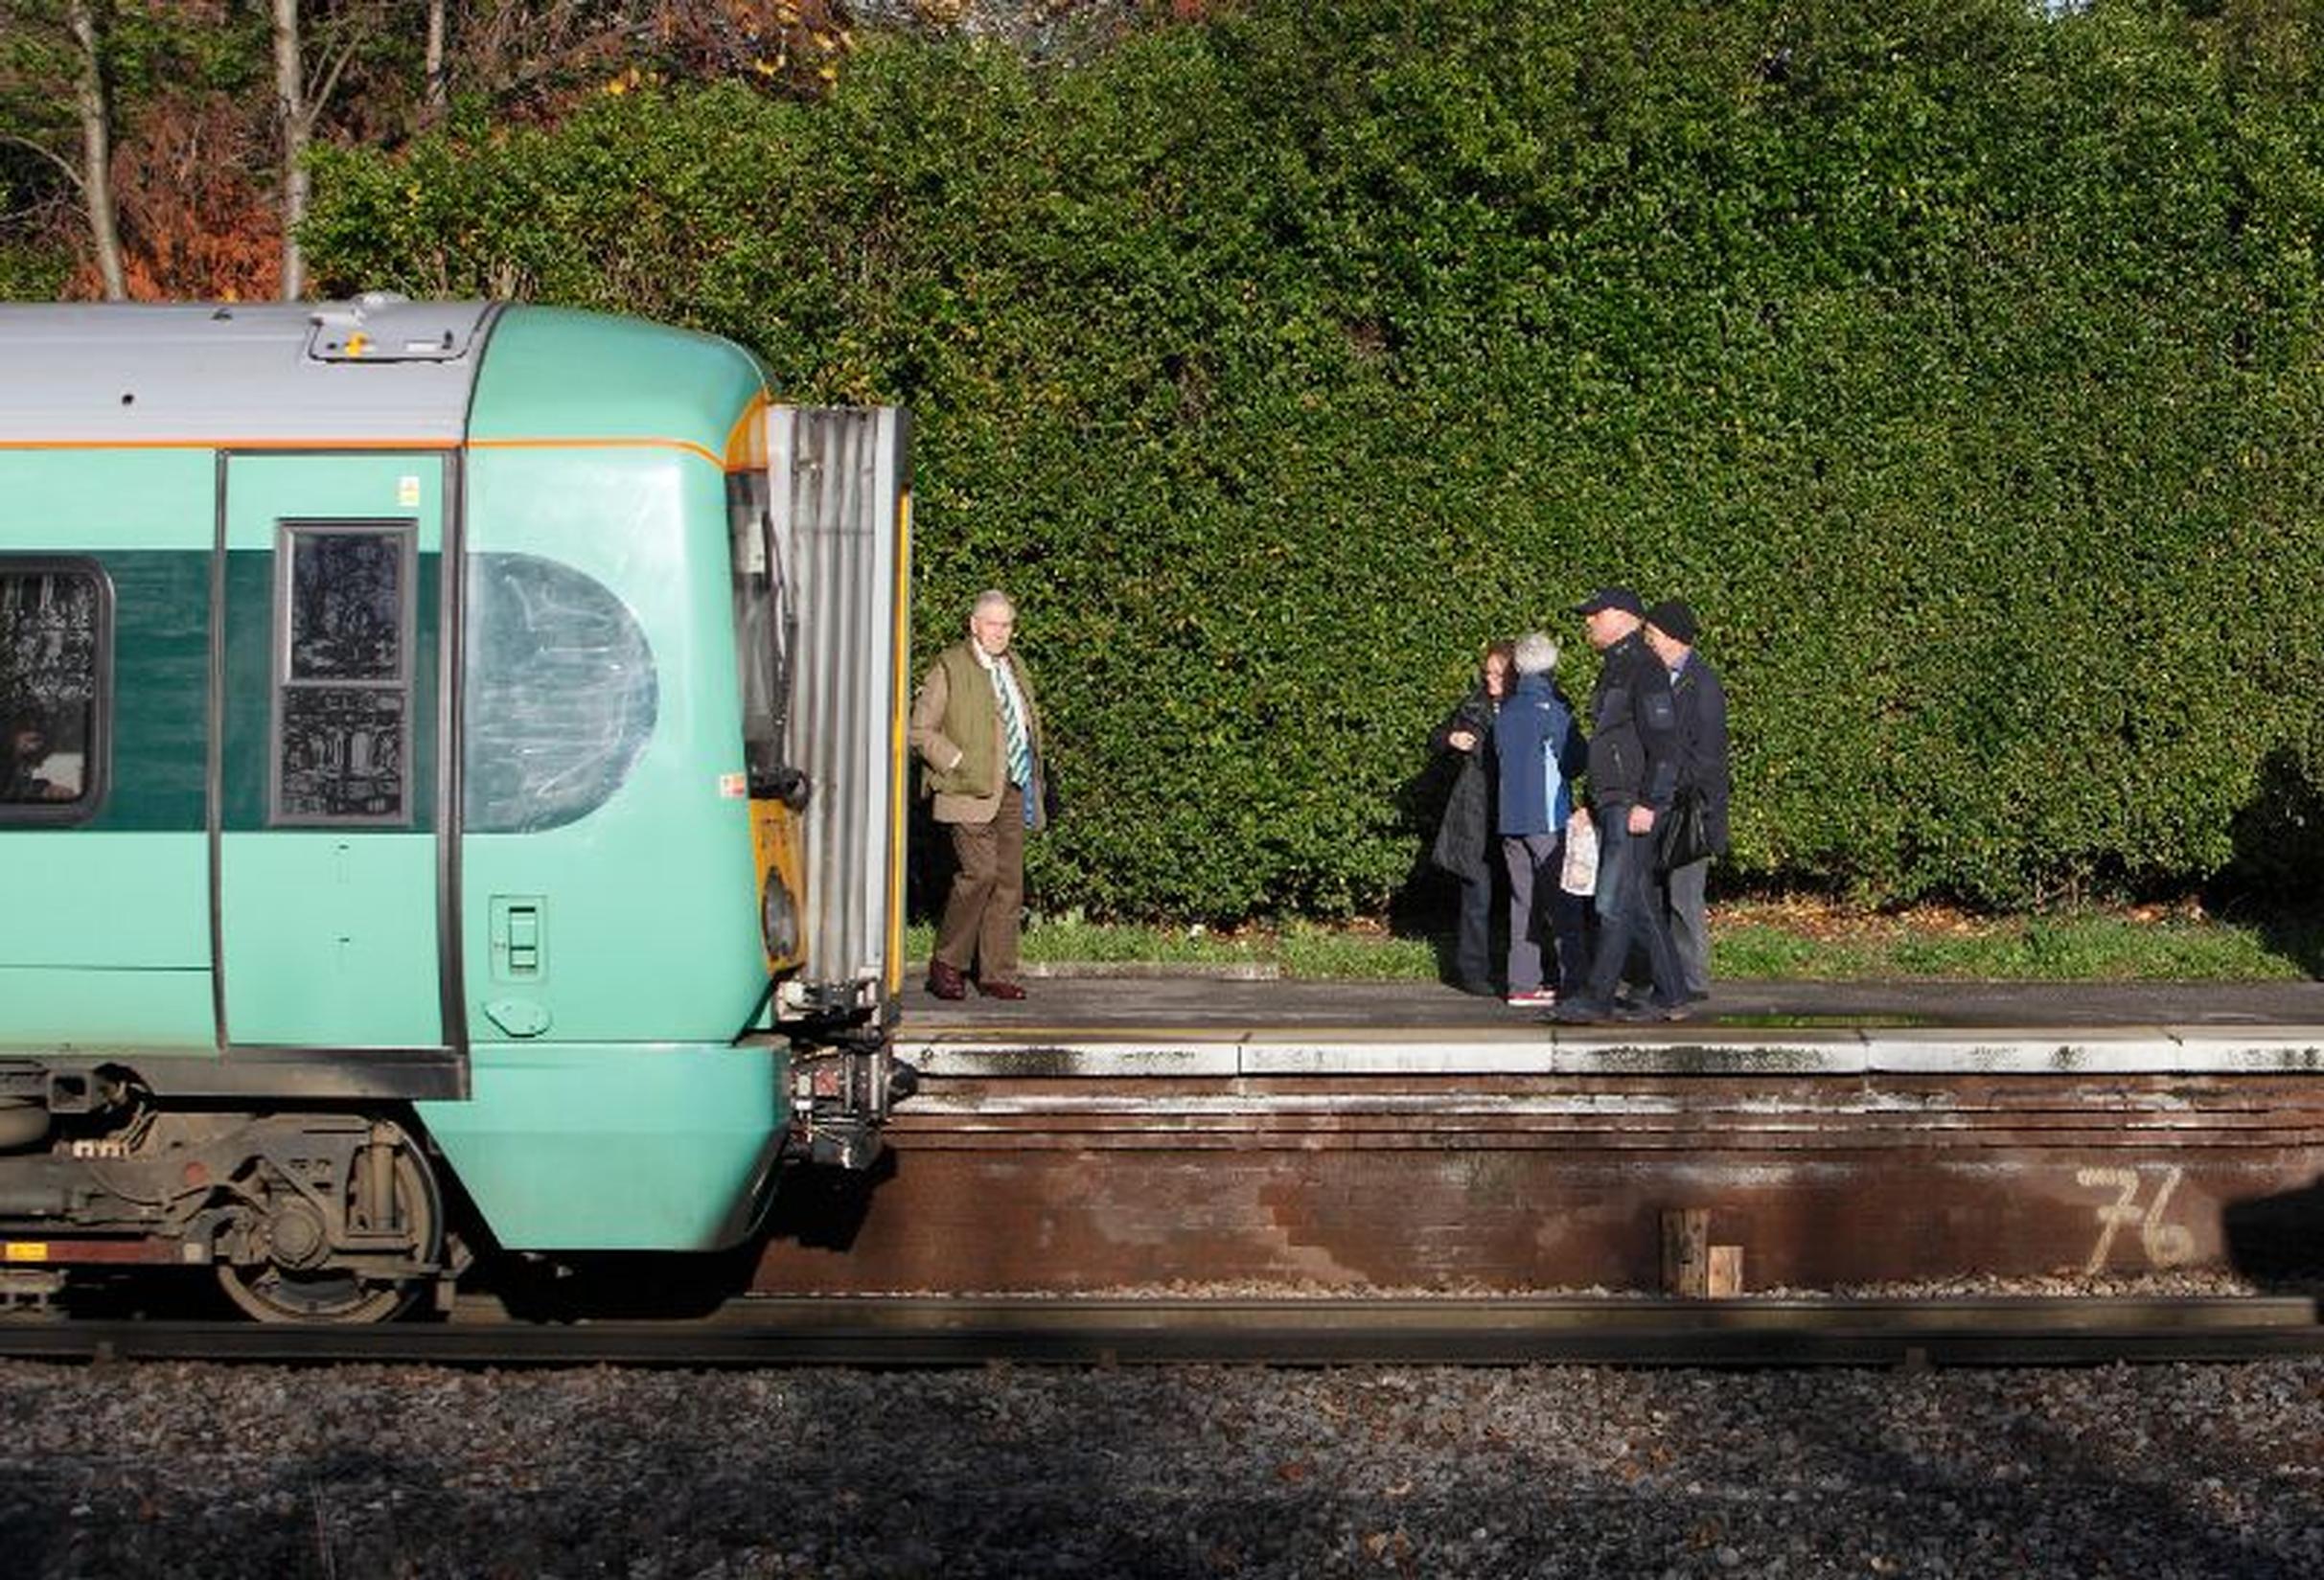 £32m funding would be used to improve rail services in Sutton